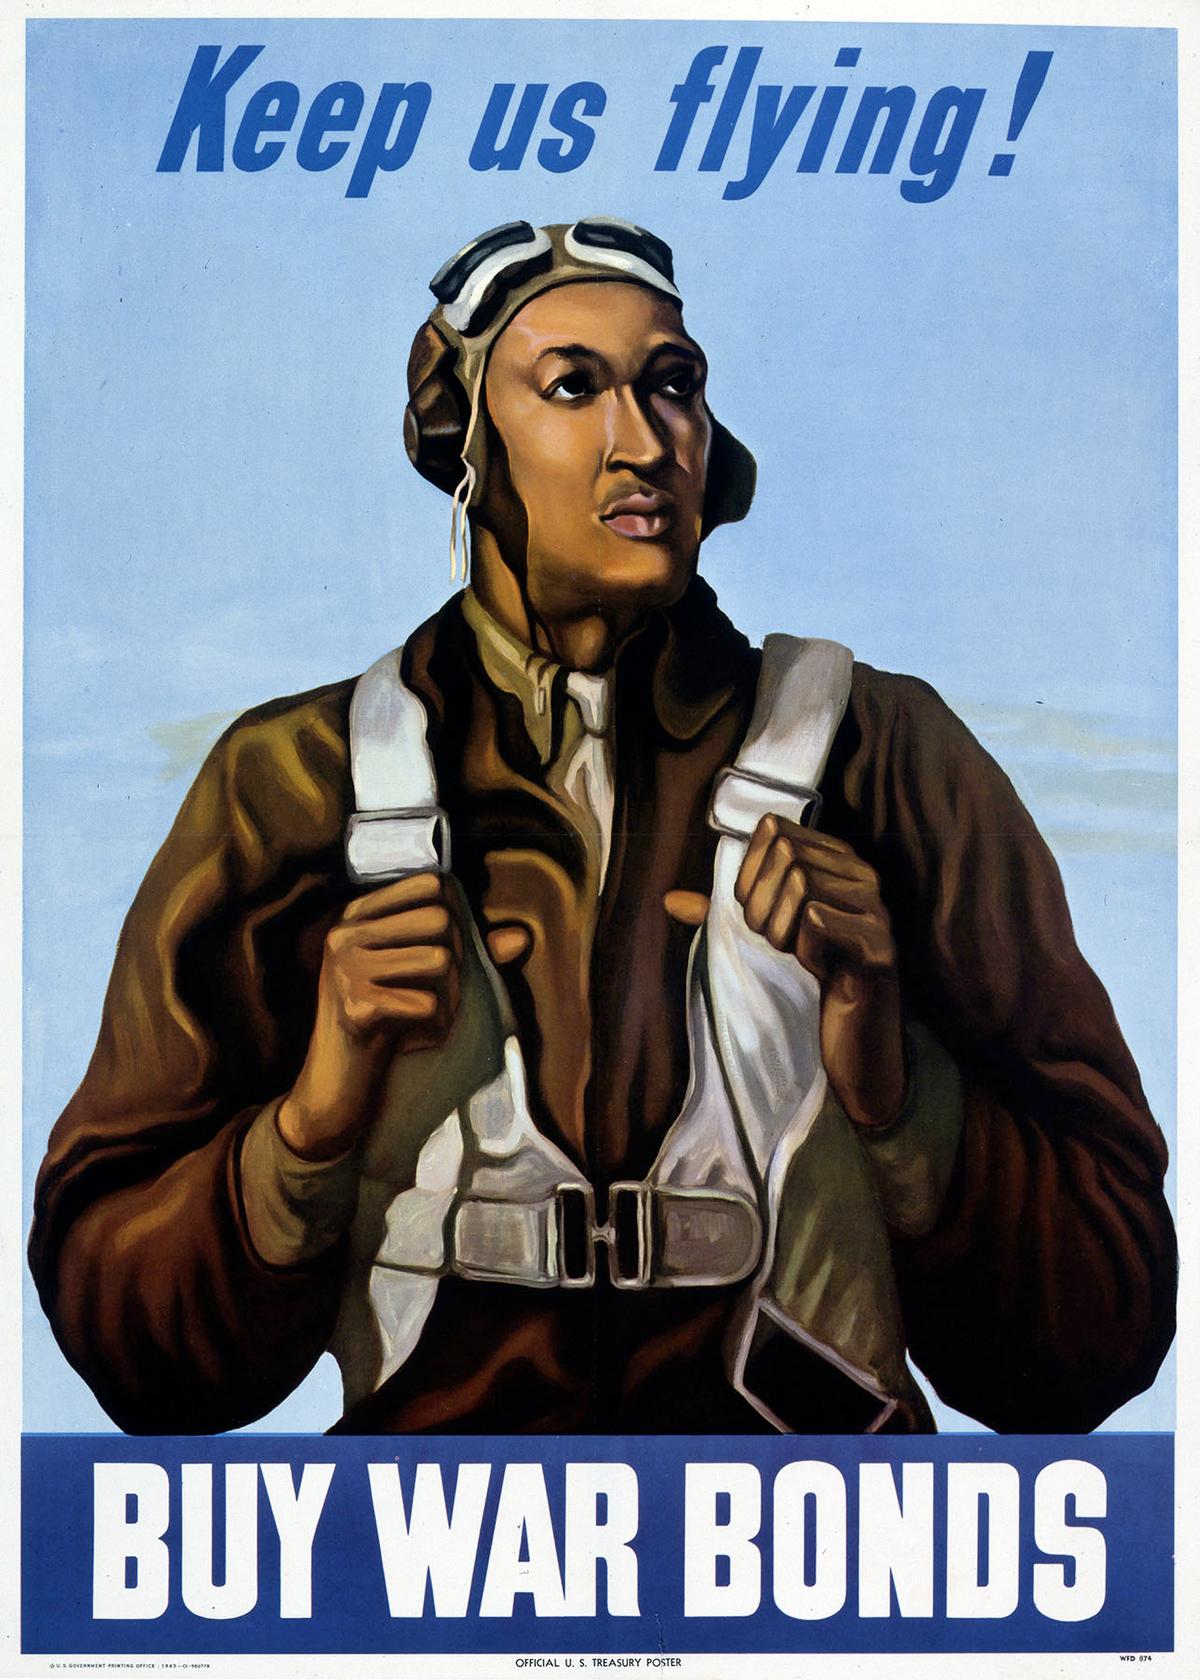 War bonds poster featuring a Tuskegee Airman (©Wikimedia Commons | <a href="https://commons.wikimedia.org/wiki/File:Tuskegee_airman_poster.jpg">Darwinek</a>)